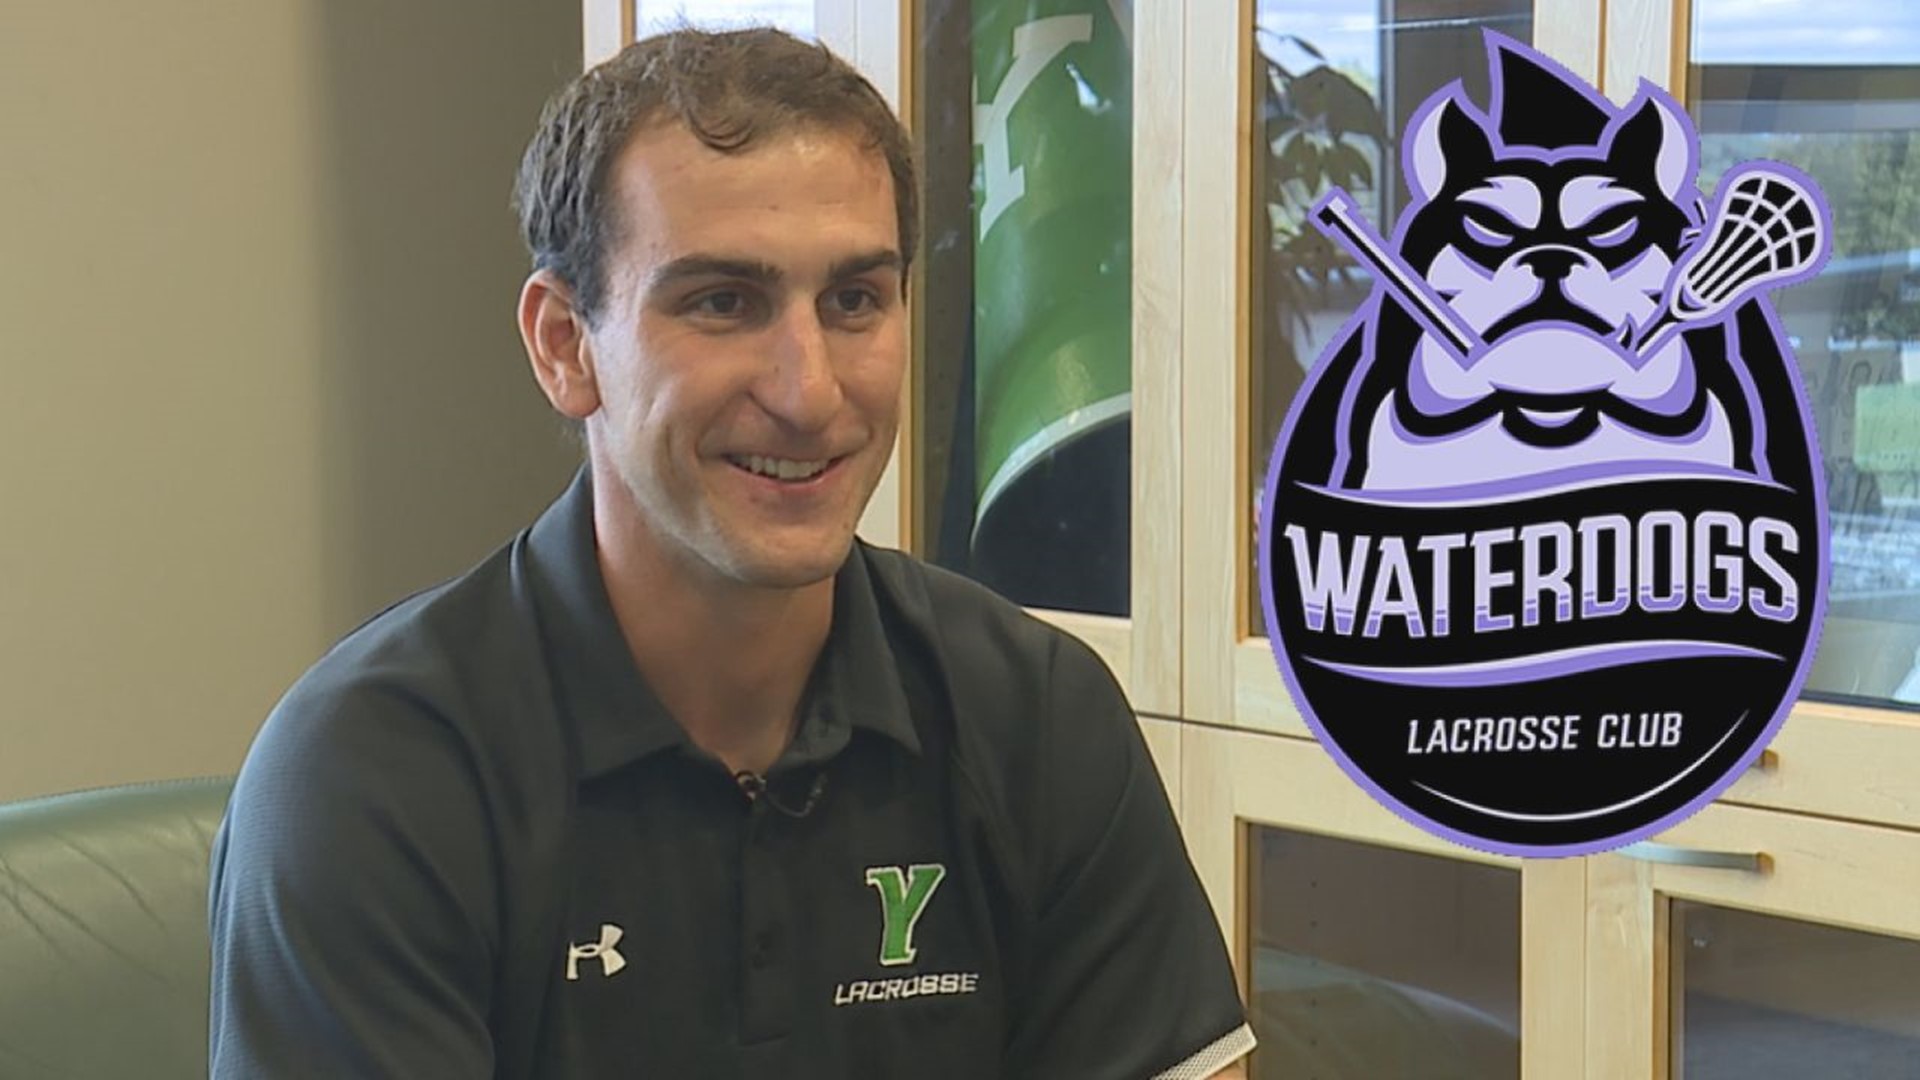 The former Spartan captain and current assistant coach also plays in the Premier Lacrosse League for the Waterdogs.